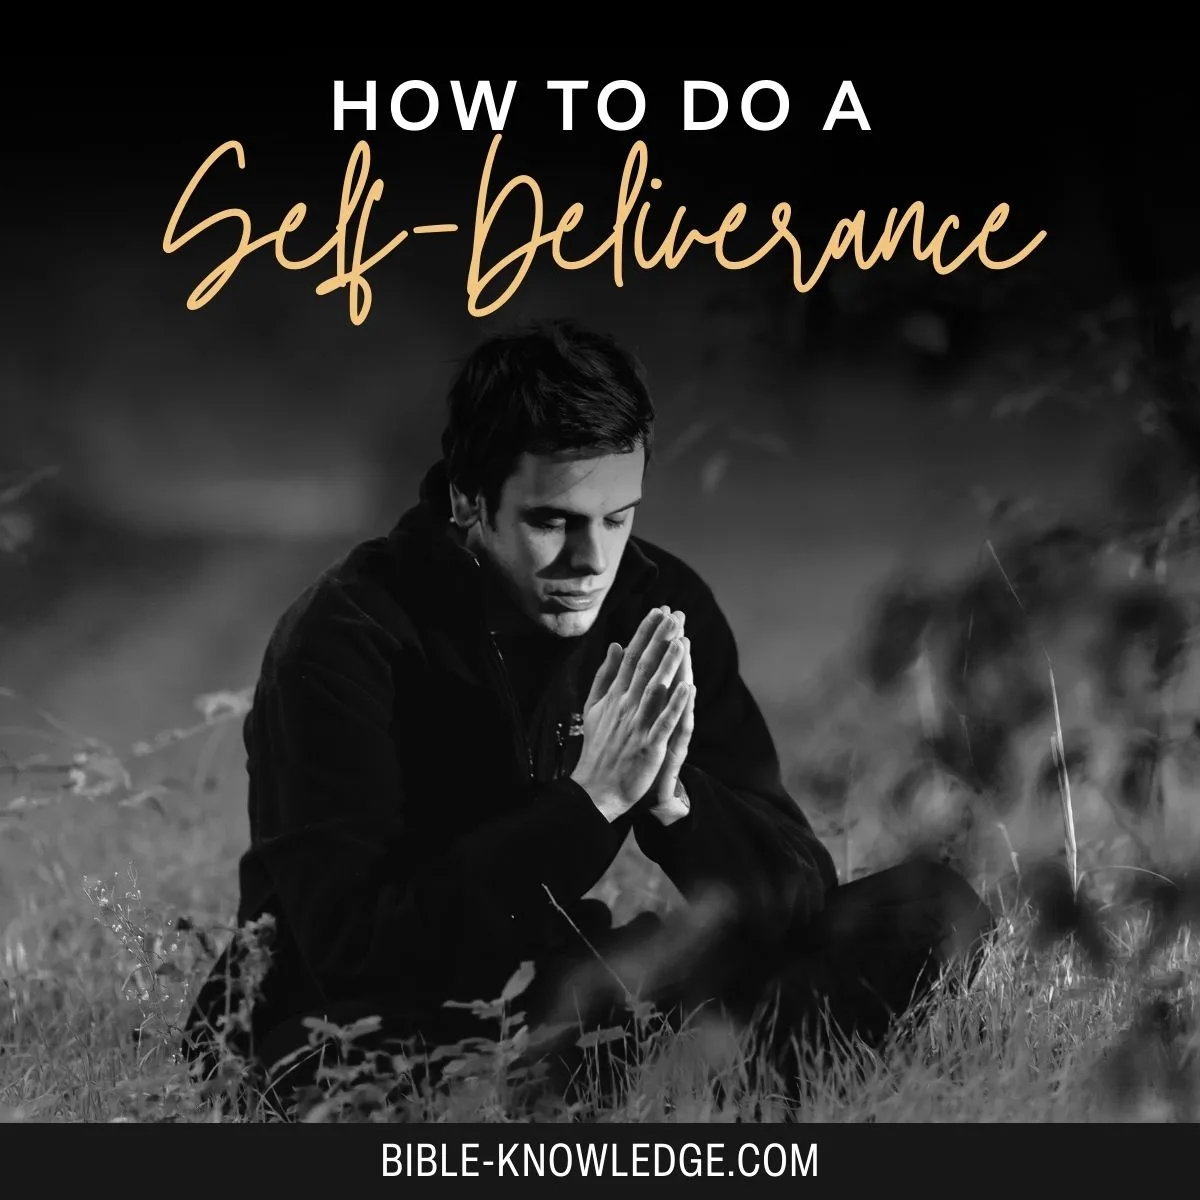 How To Do a Self-Deliverance